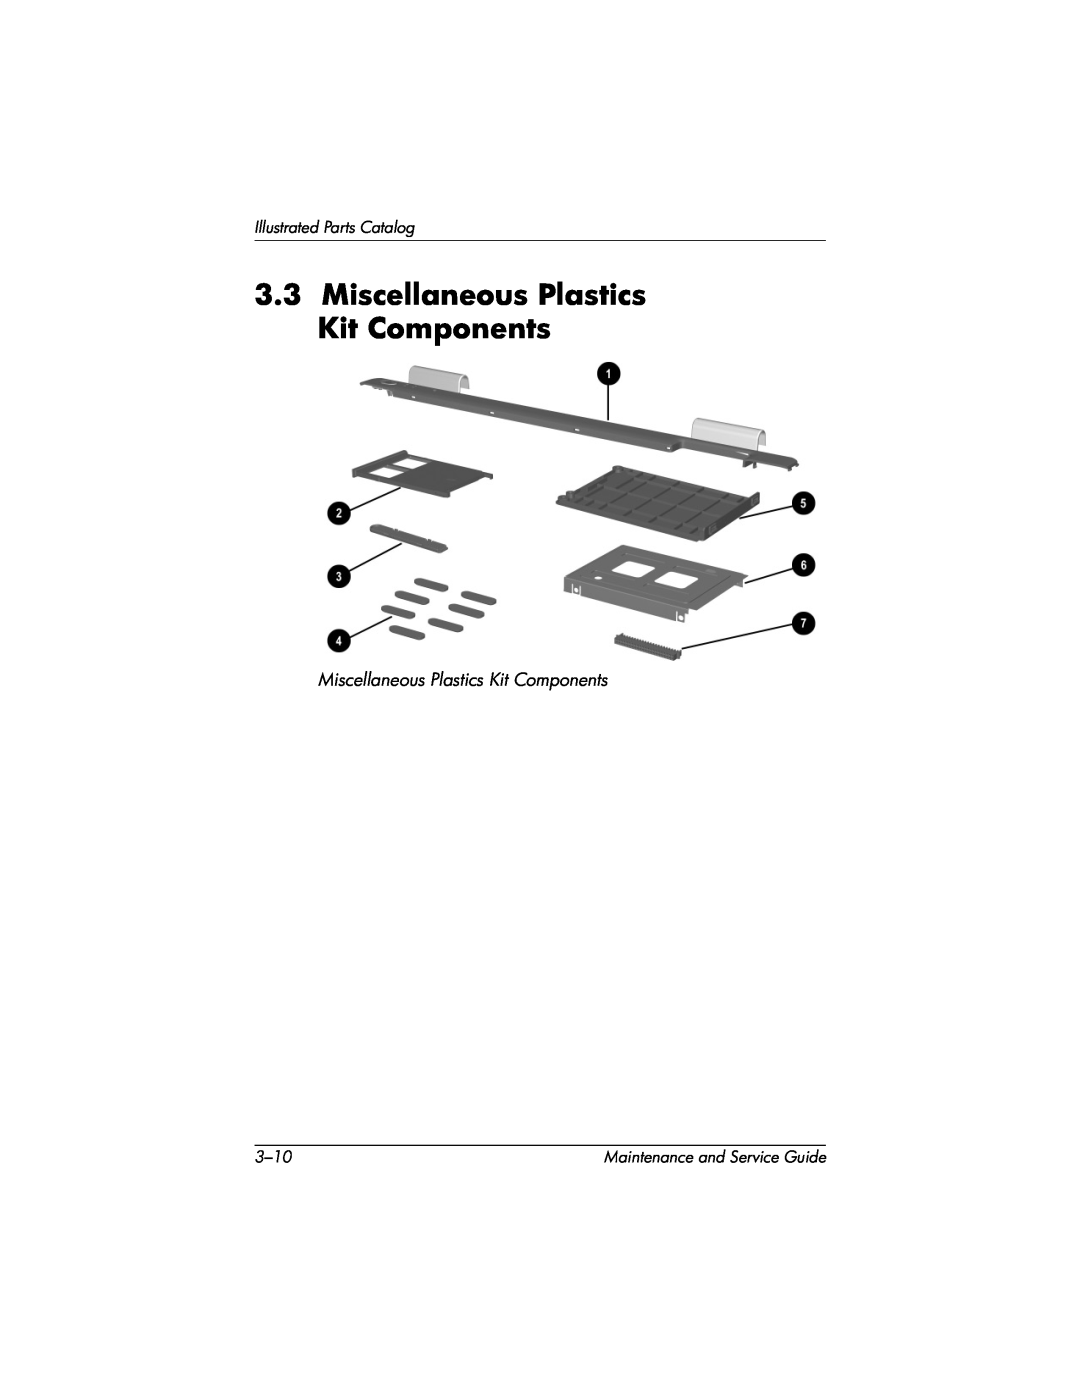 HP X1000, nx7000 Miscellaneous Plastics Kit Components, Illustrated Parts Catalog, 3-10, Maintenance and Service Guide 